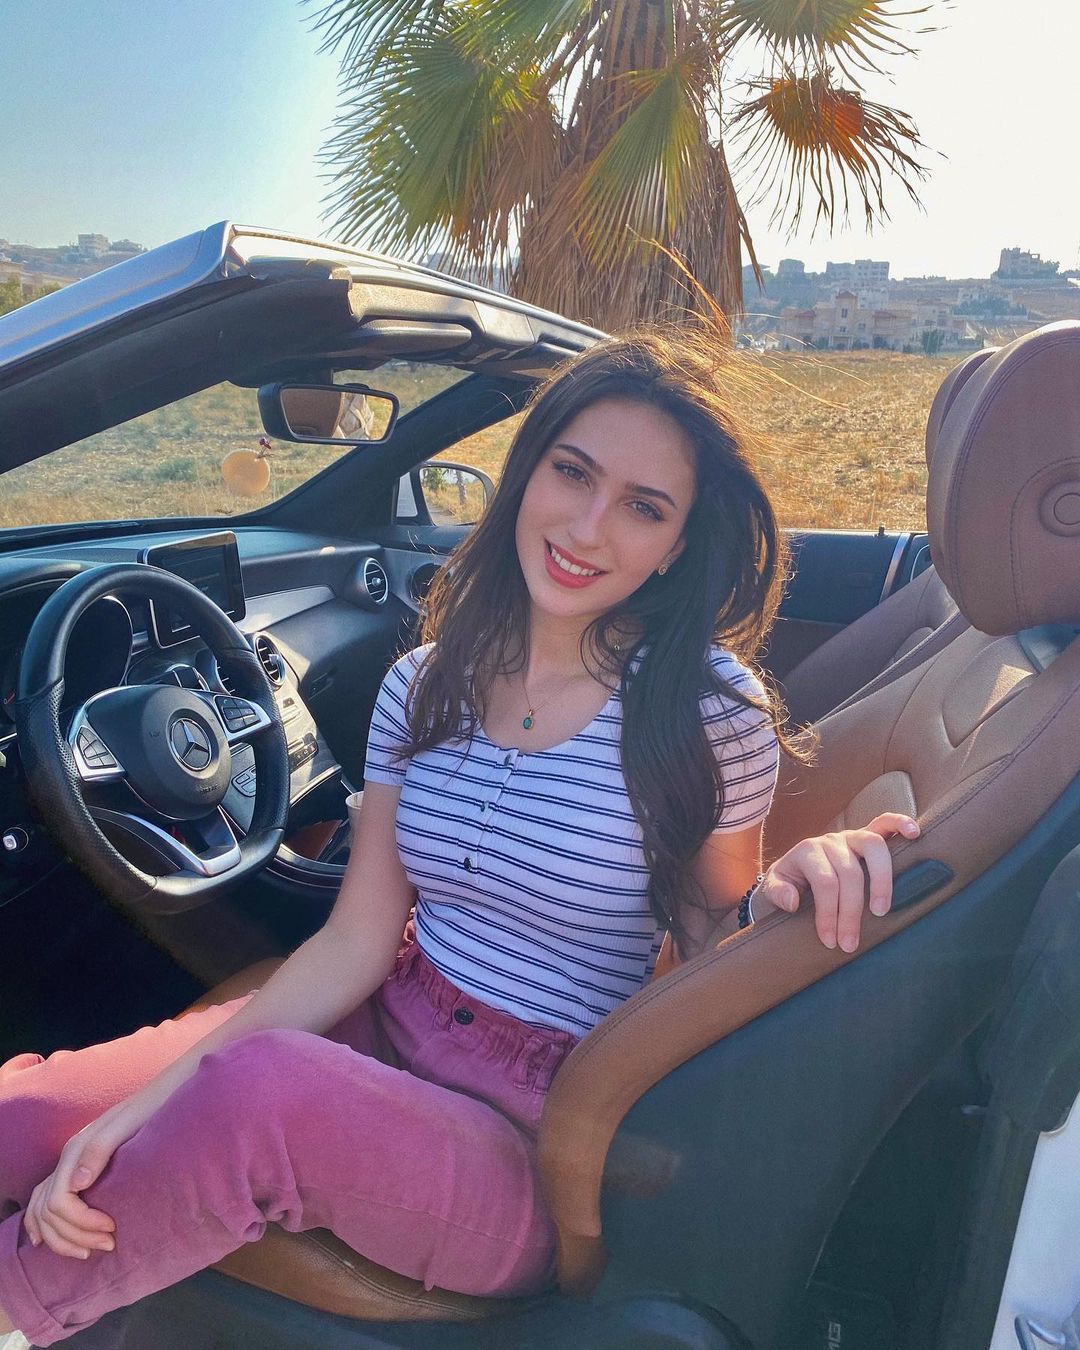 You are currently viewing Life as Sara (Youtuber) Biography, Age, Height, Net Worth